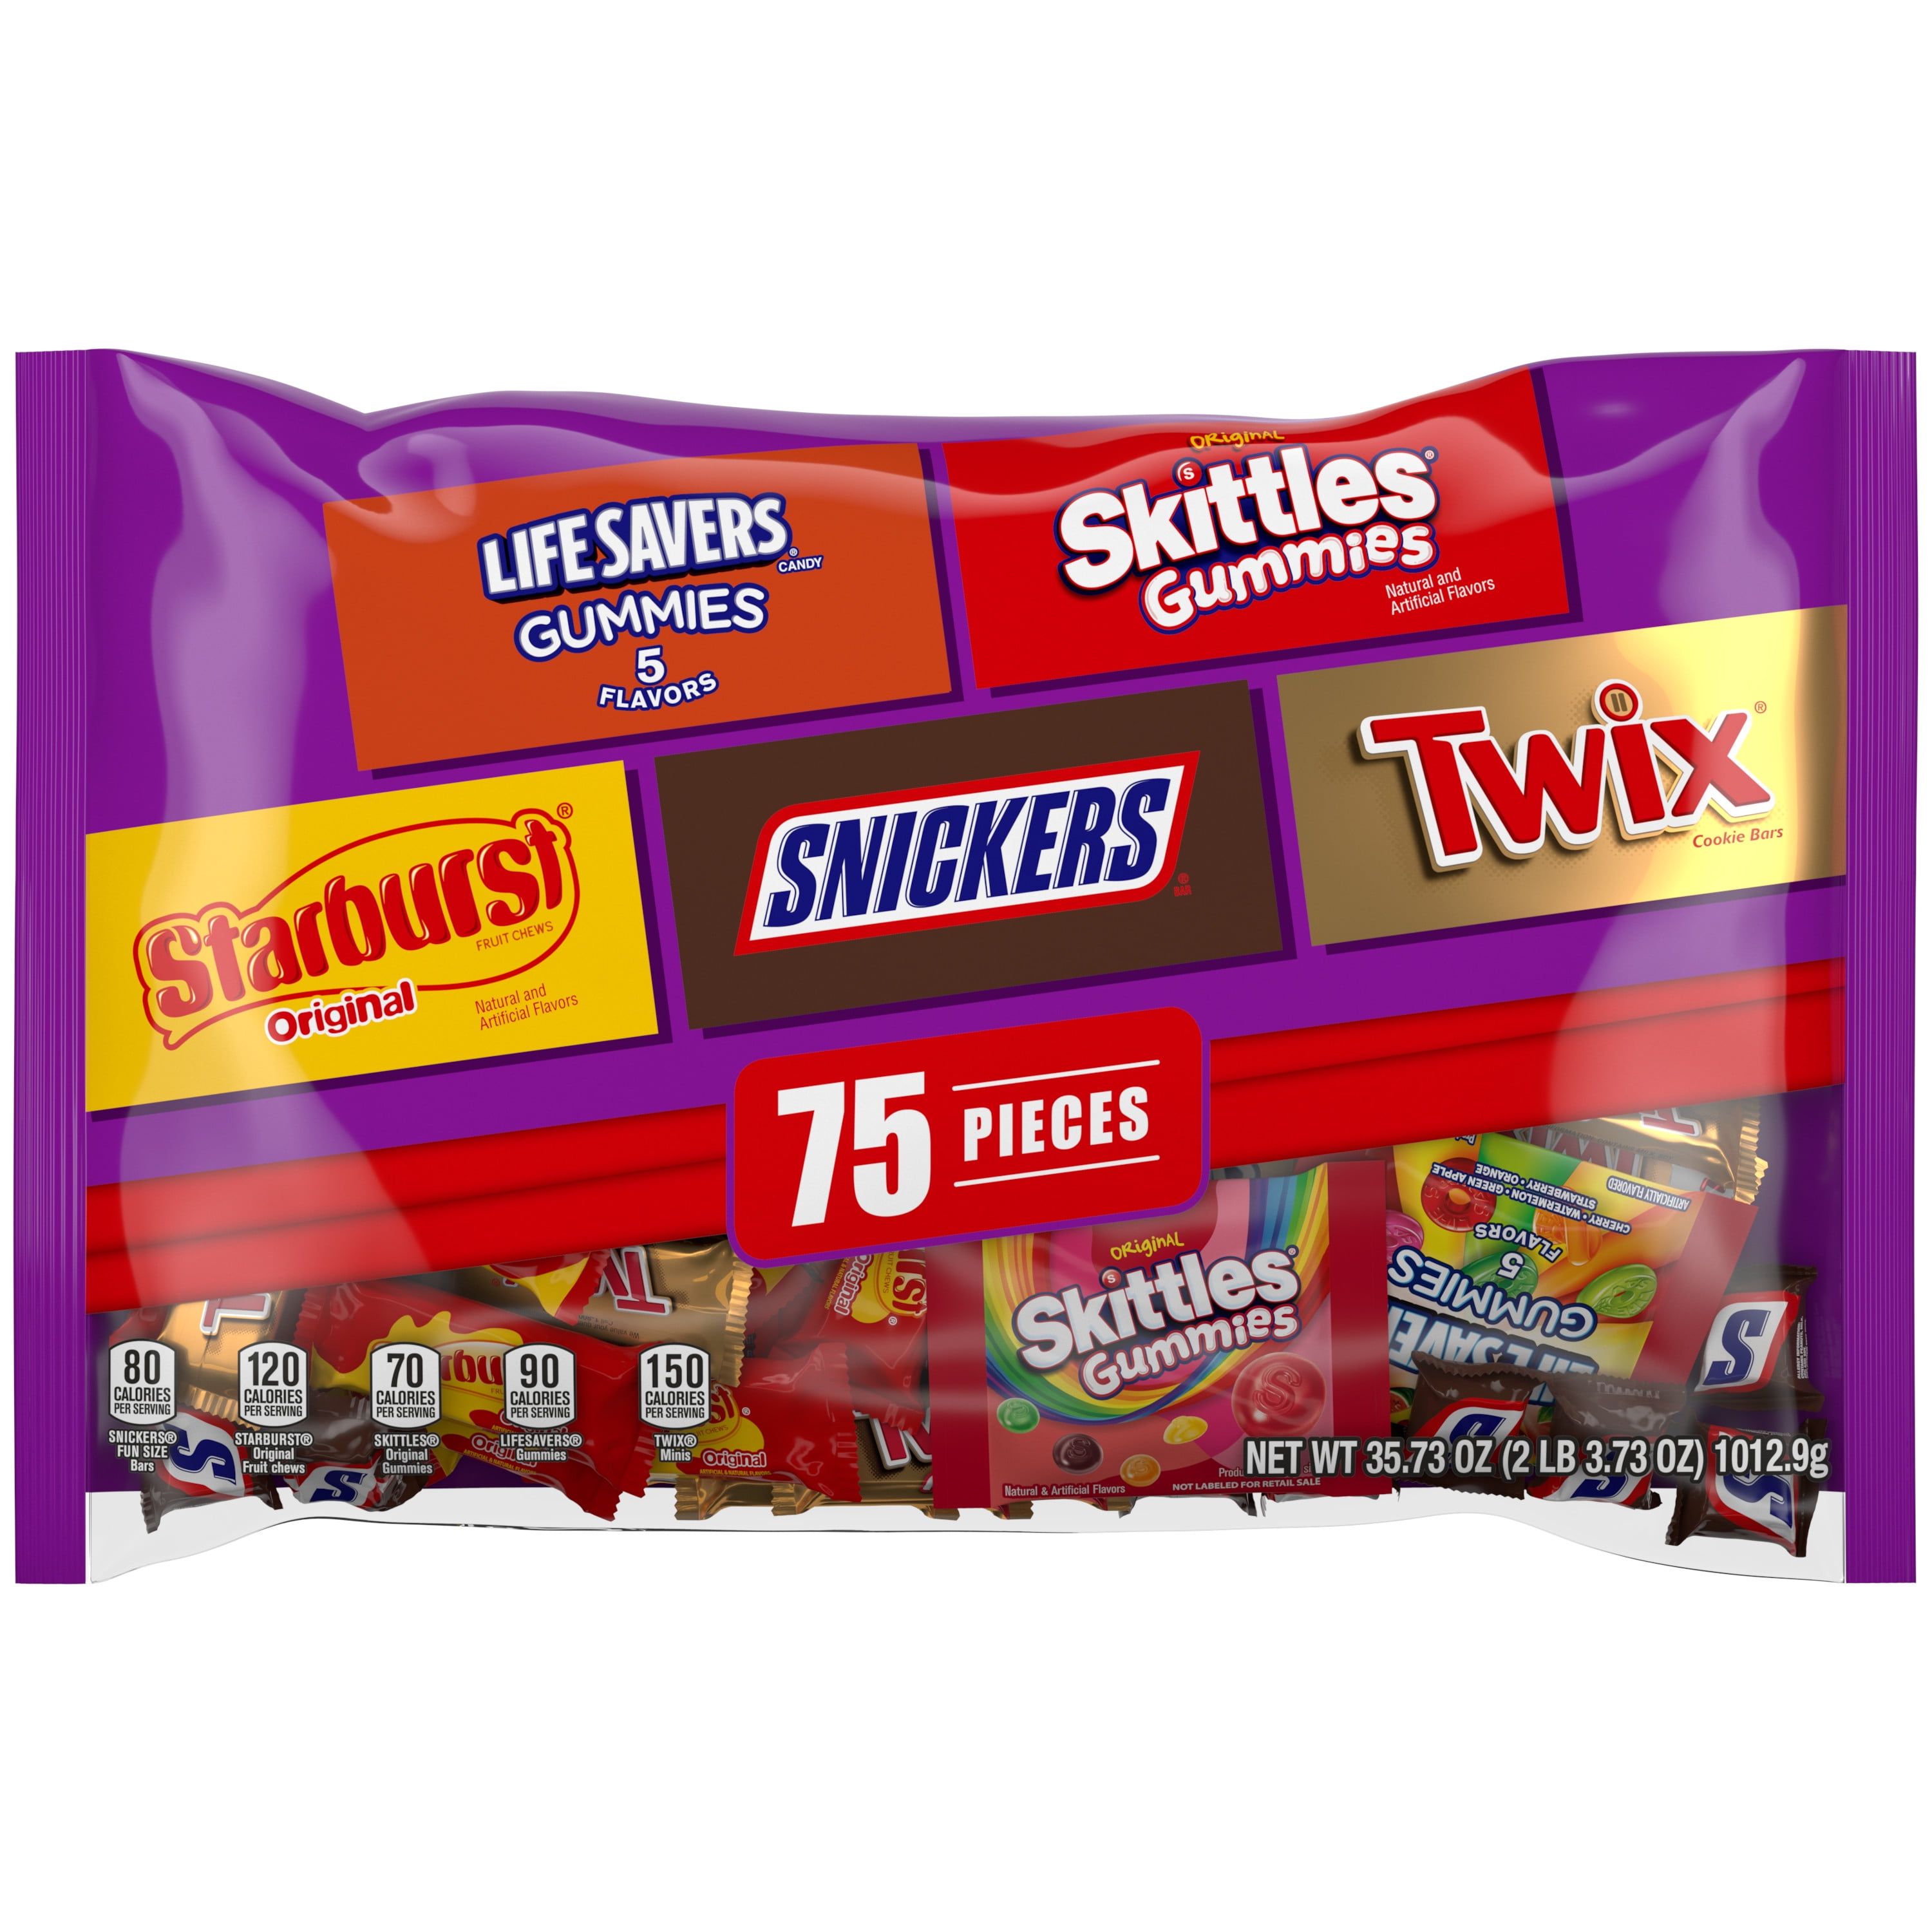 M&M’s Halloween Trick-or-Treat Candy, Unique Halloween Candy for Party Favors or Treat Bags (Set of 30 Packs)